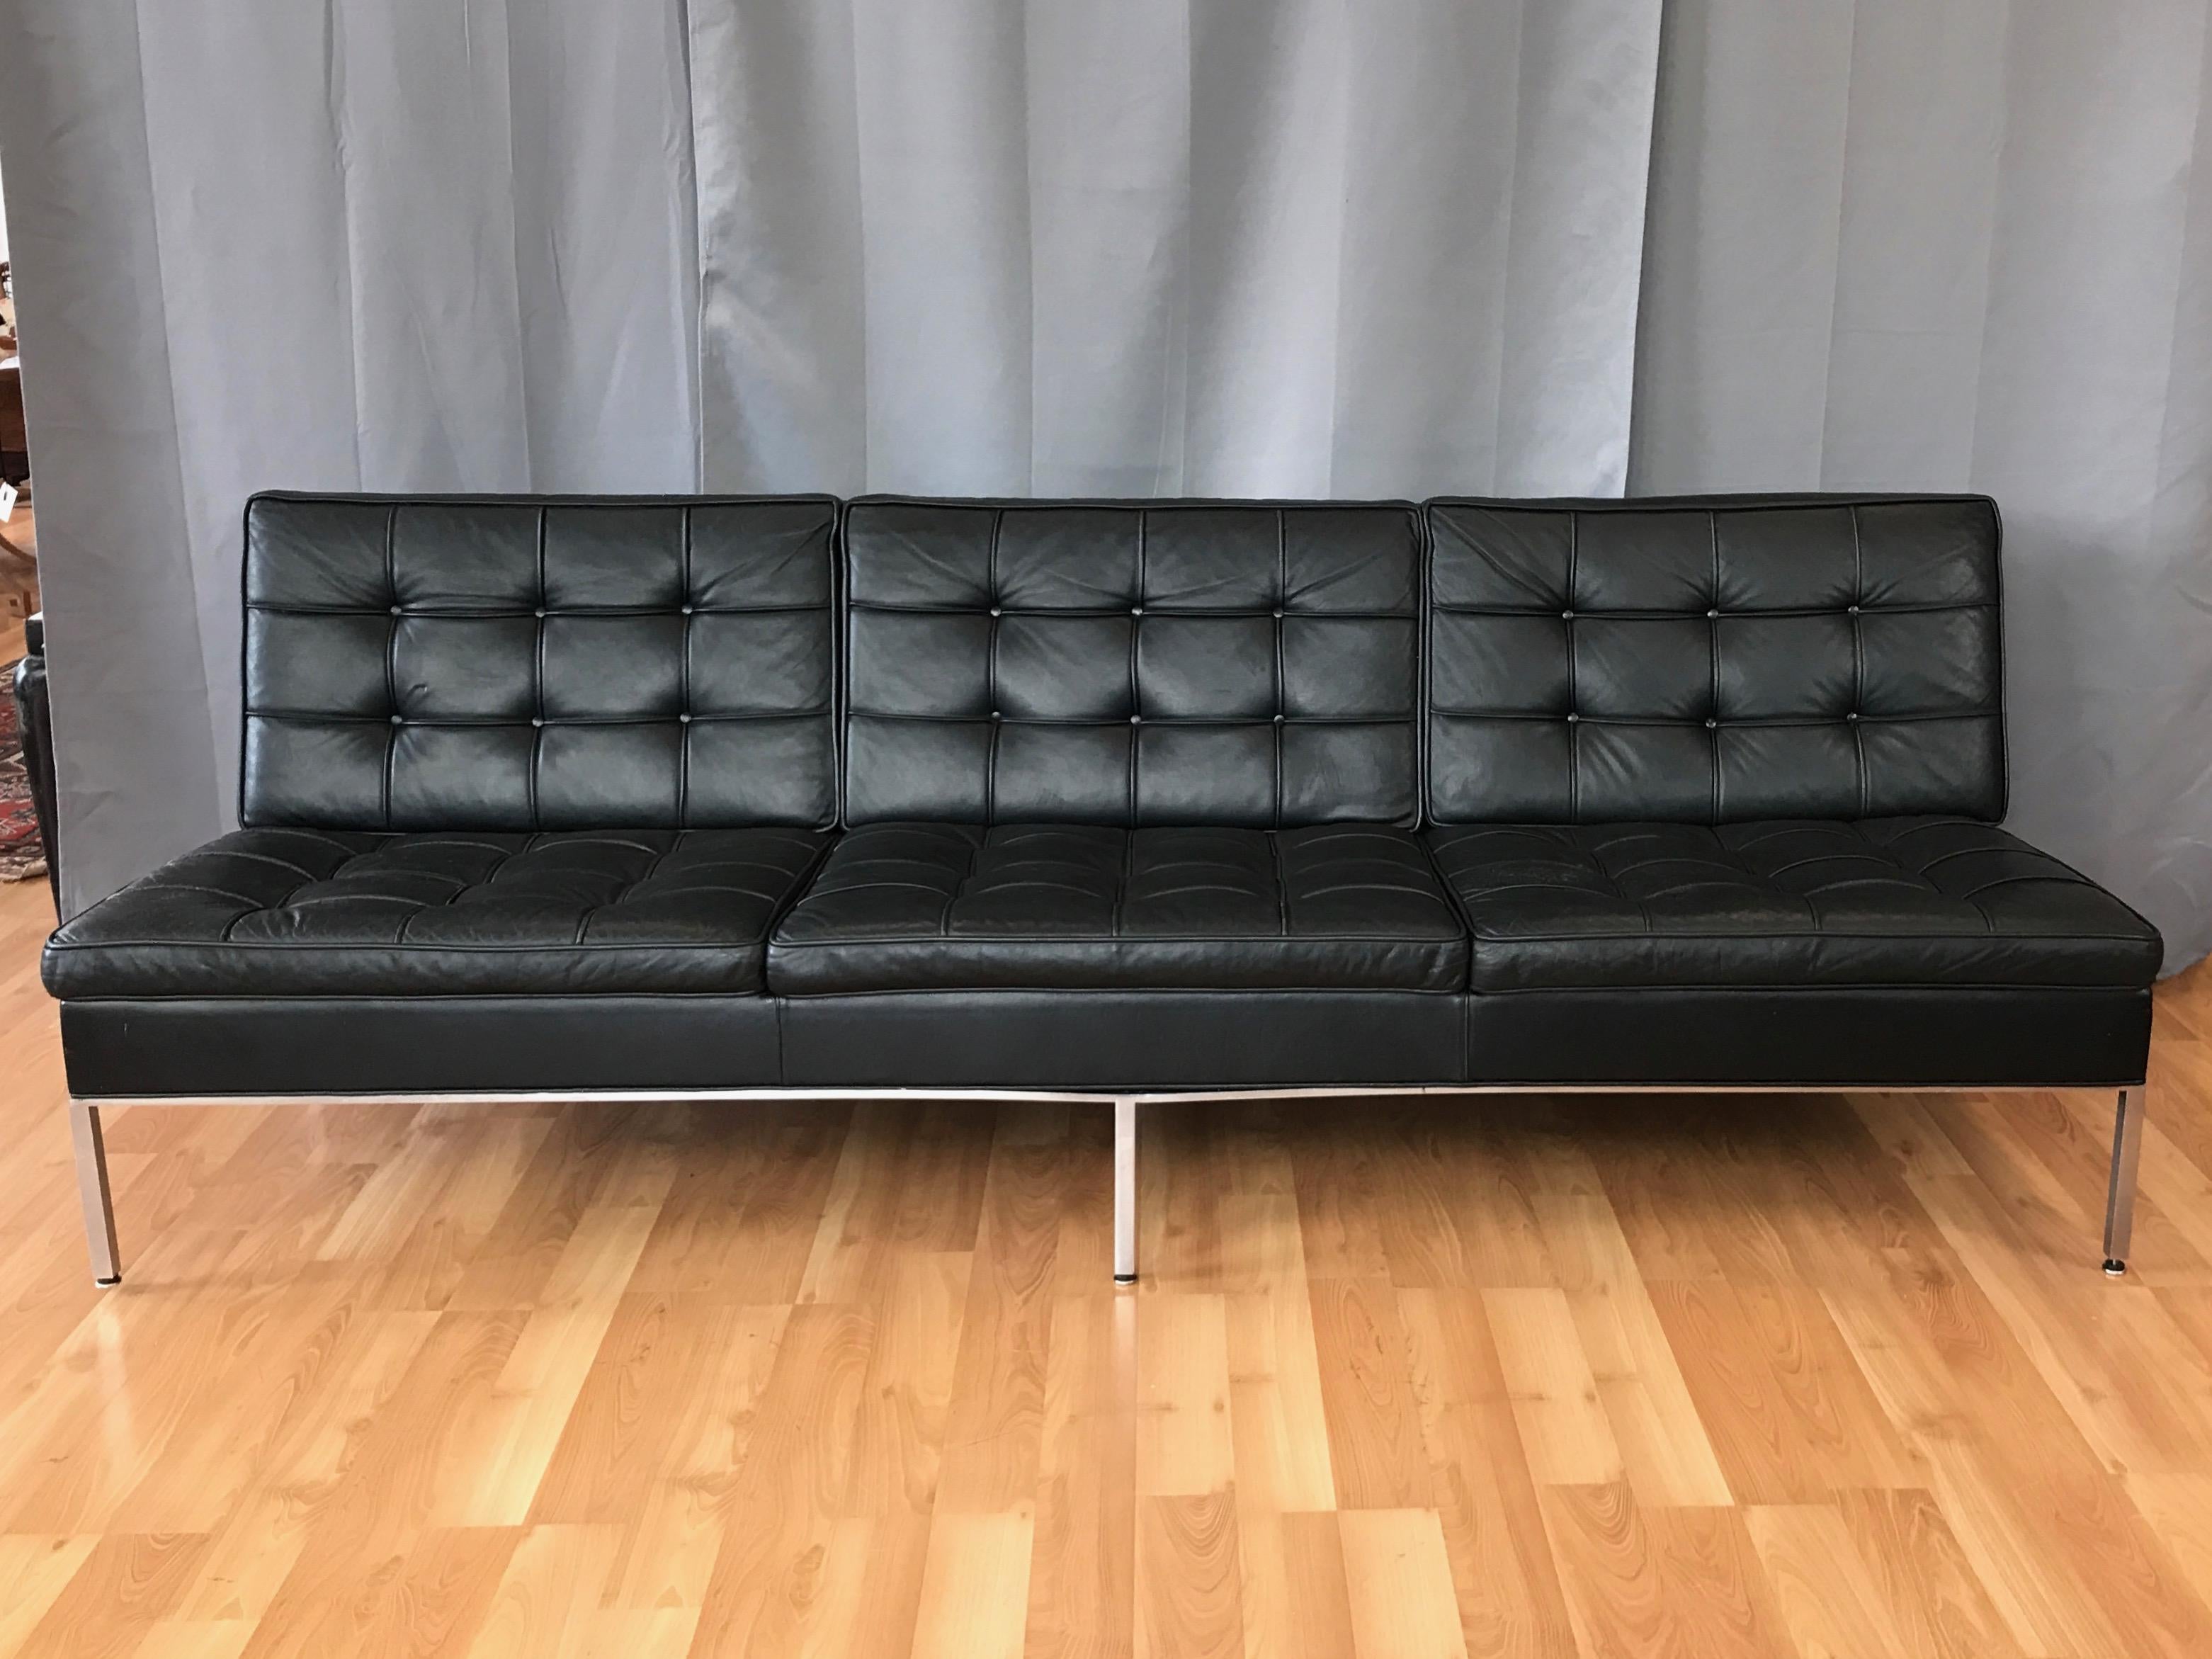 An extra-long, exceptionally handsome, and quite uncommon 1960s tufted black leather sofa by Steelcase.

Minimalist Mid-Century Modern design with carefully considered angles subtly aligned for maximum comfort, giving this impressive vintage sofa